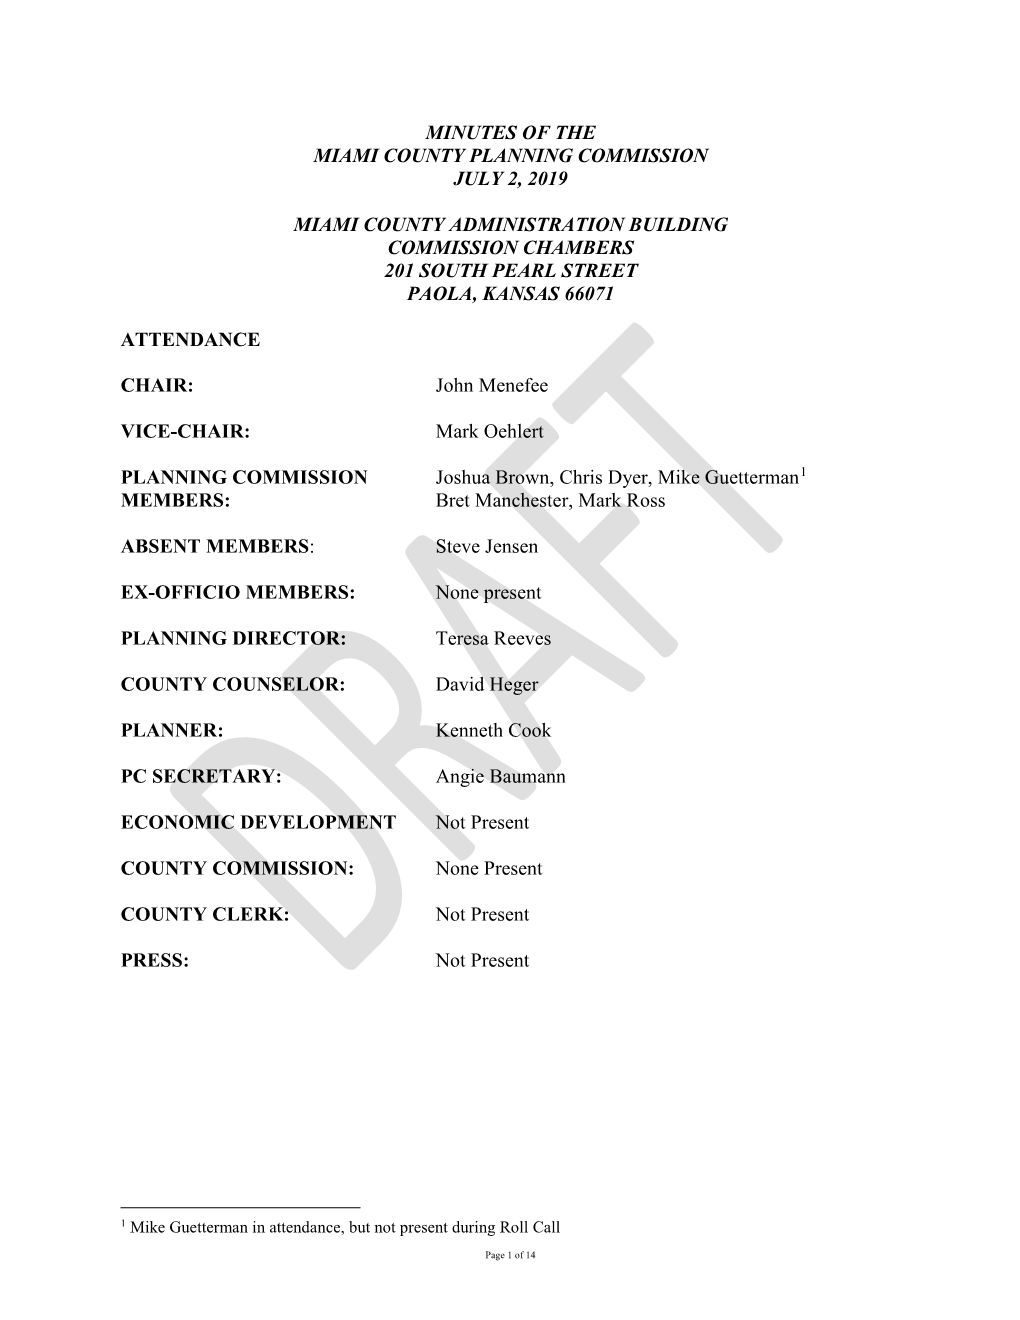 Minutes of the Miami County Planning Commission July 2, 2019